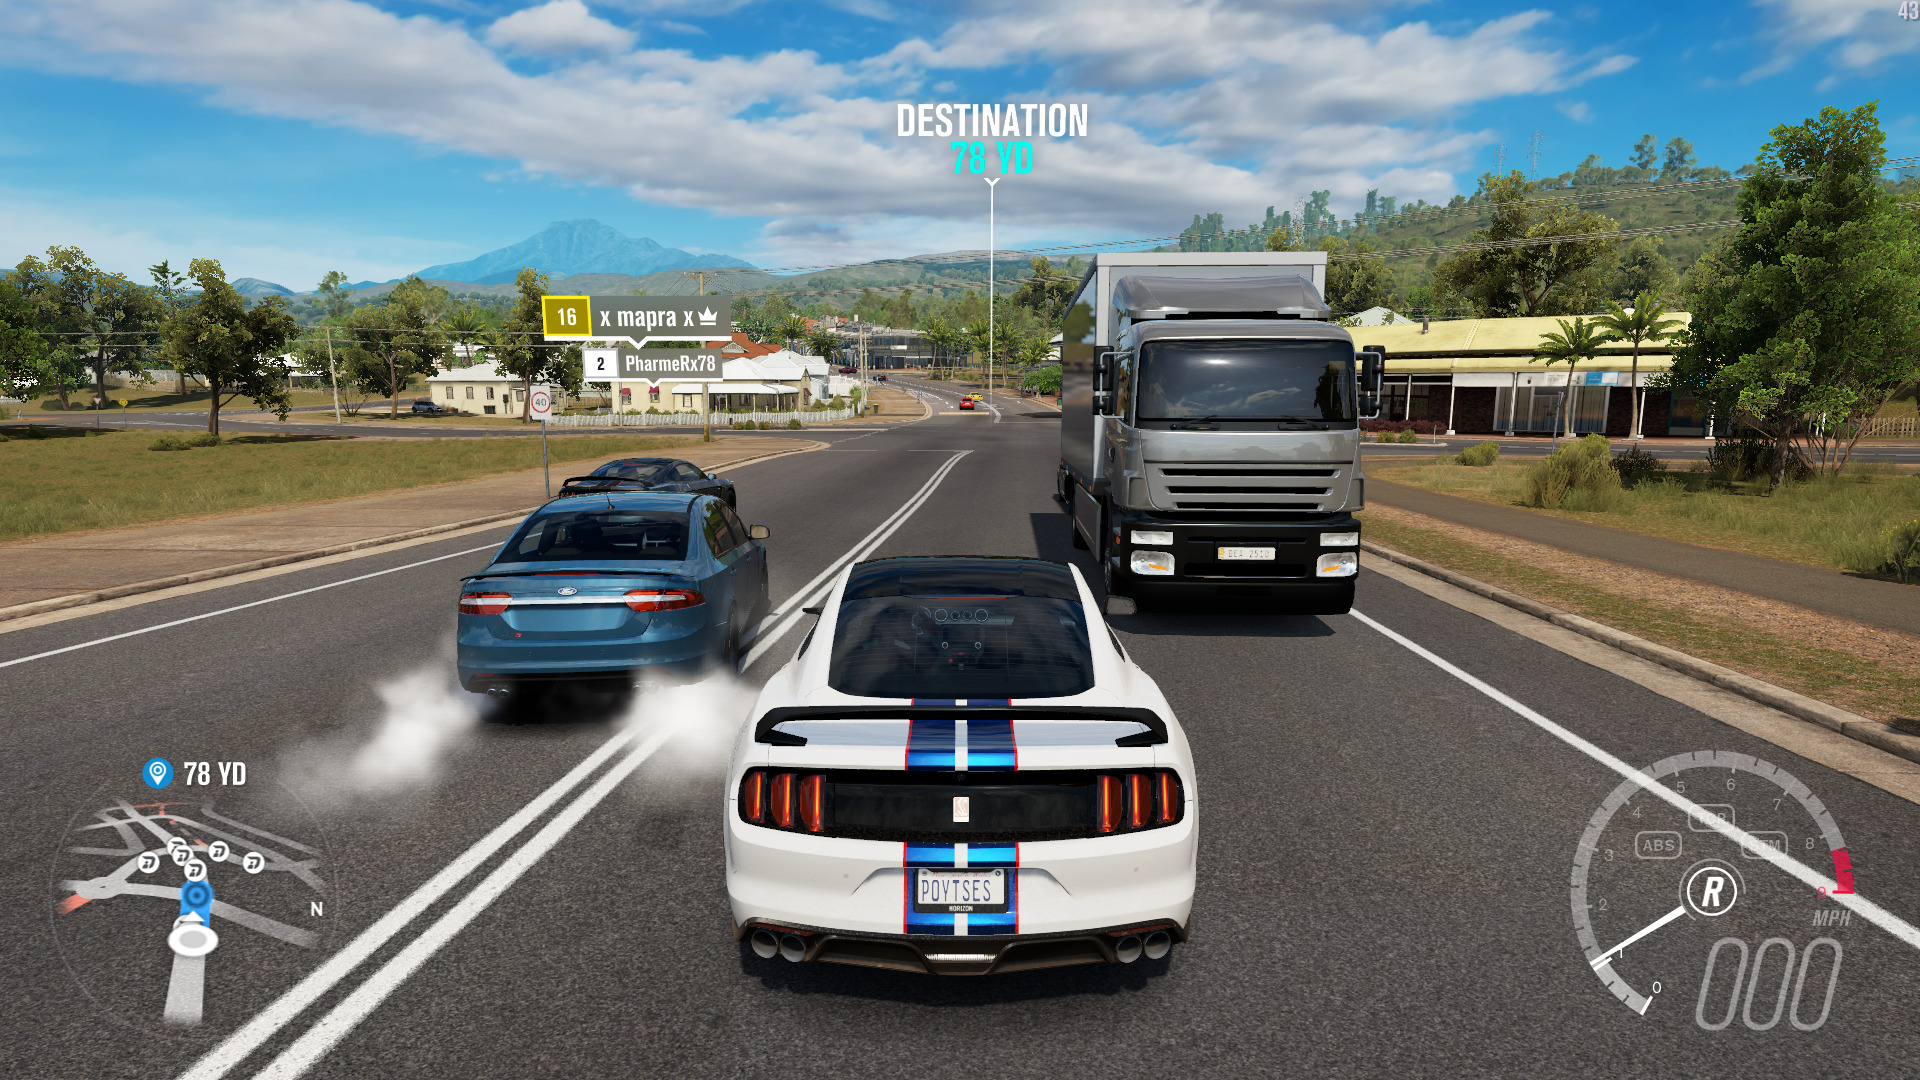 Forza Horizon 3 System Requirements